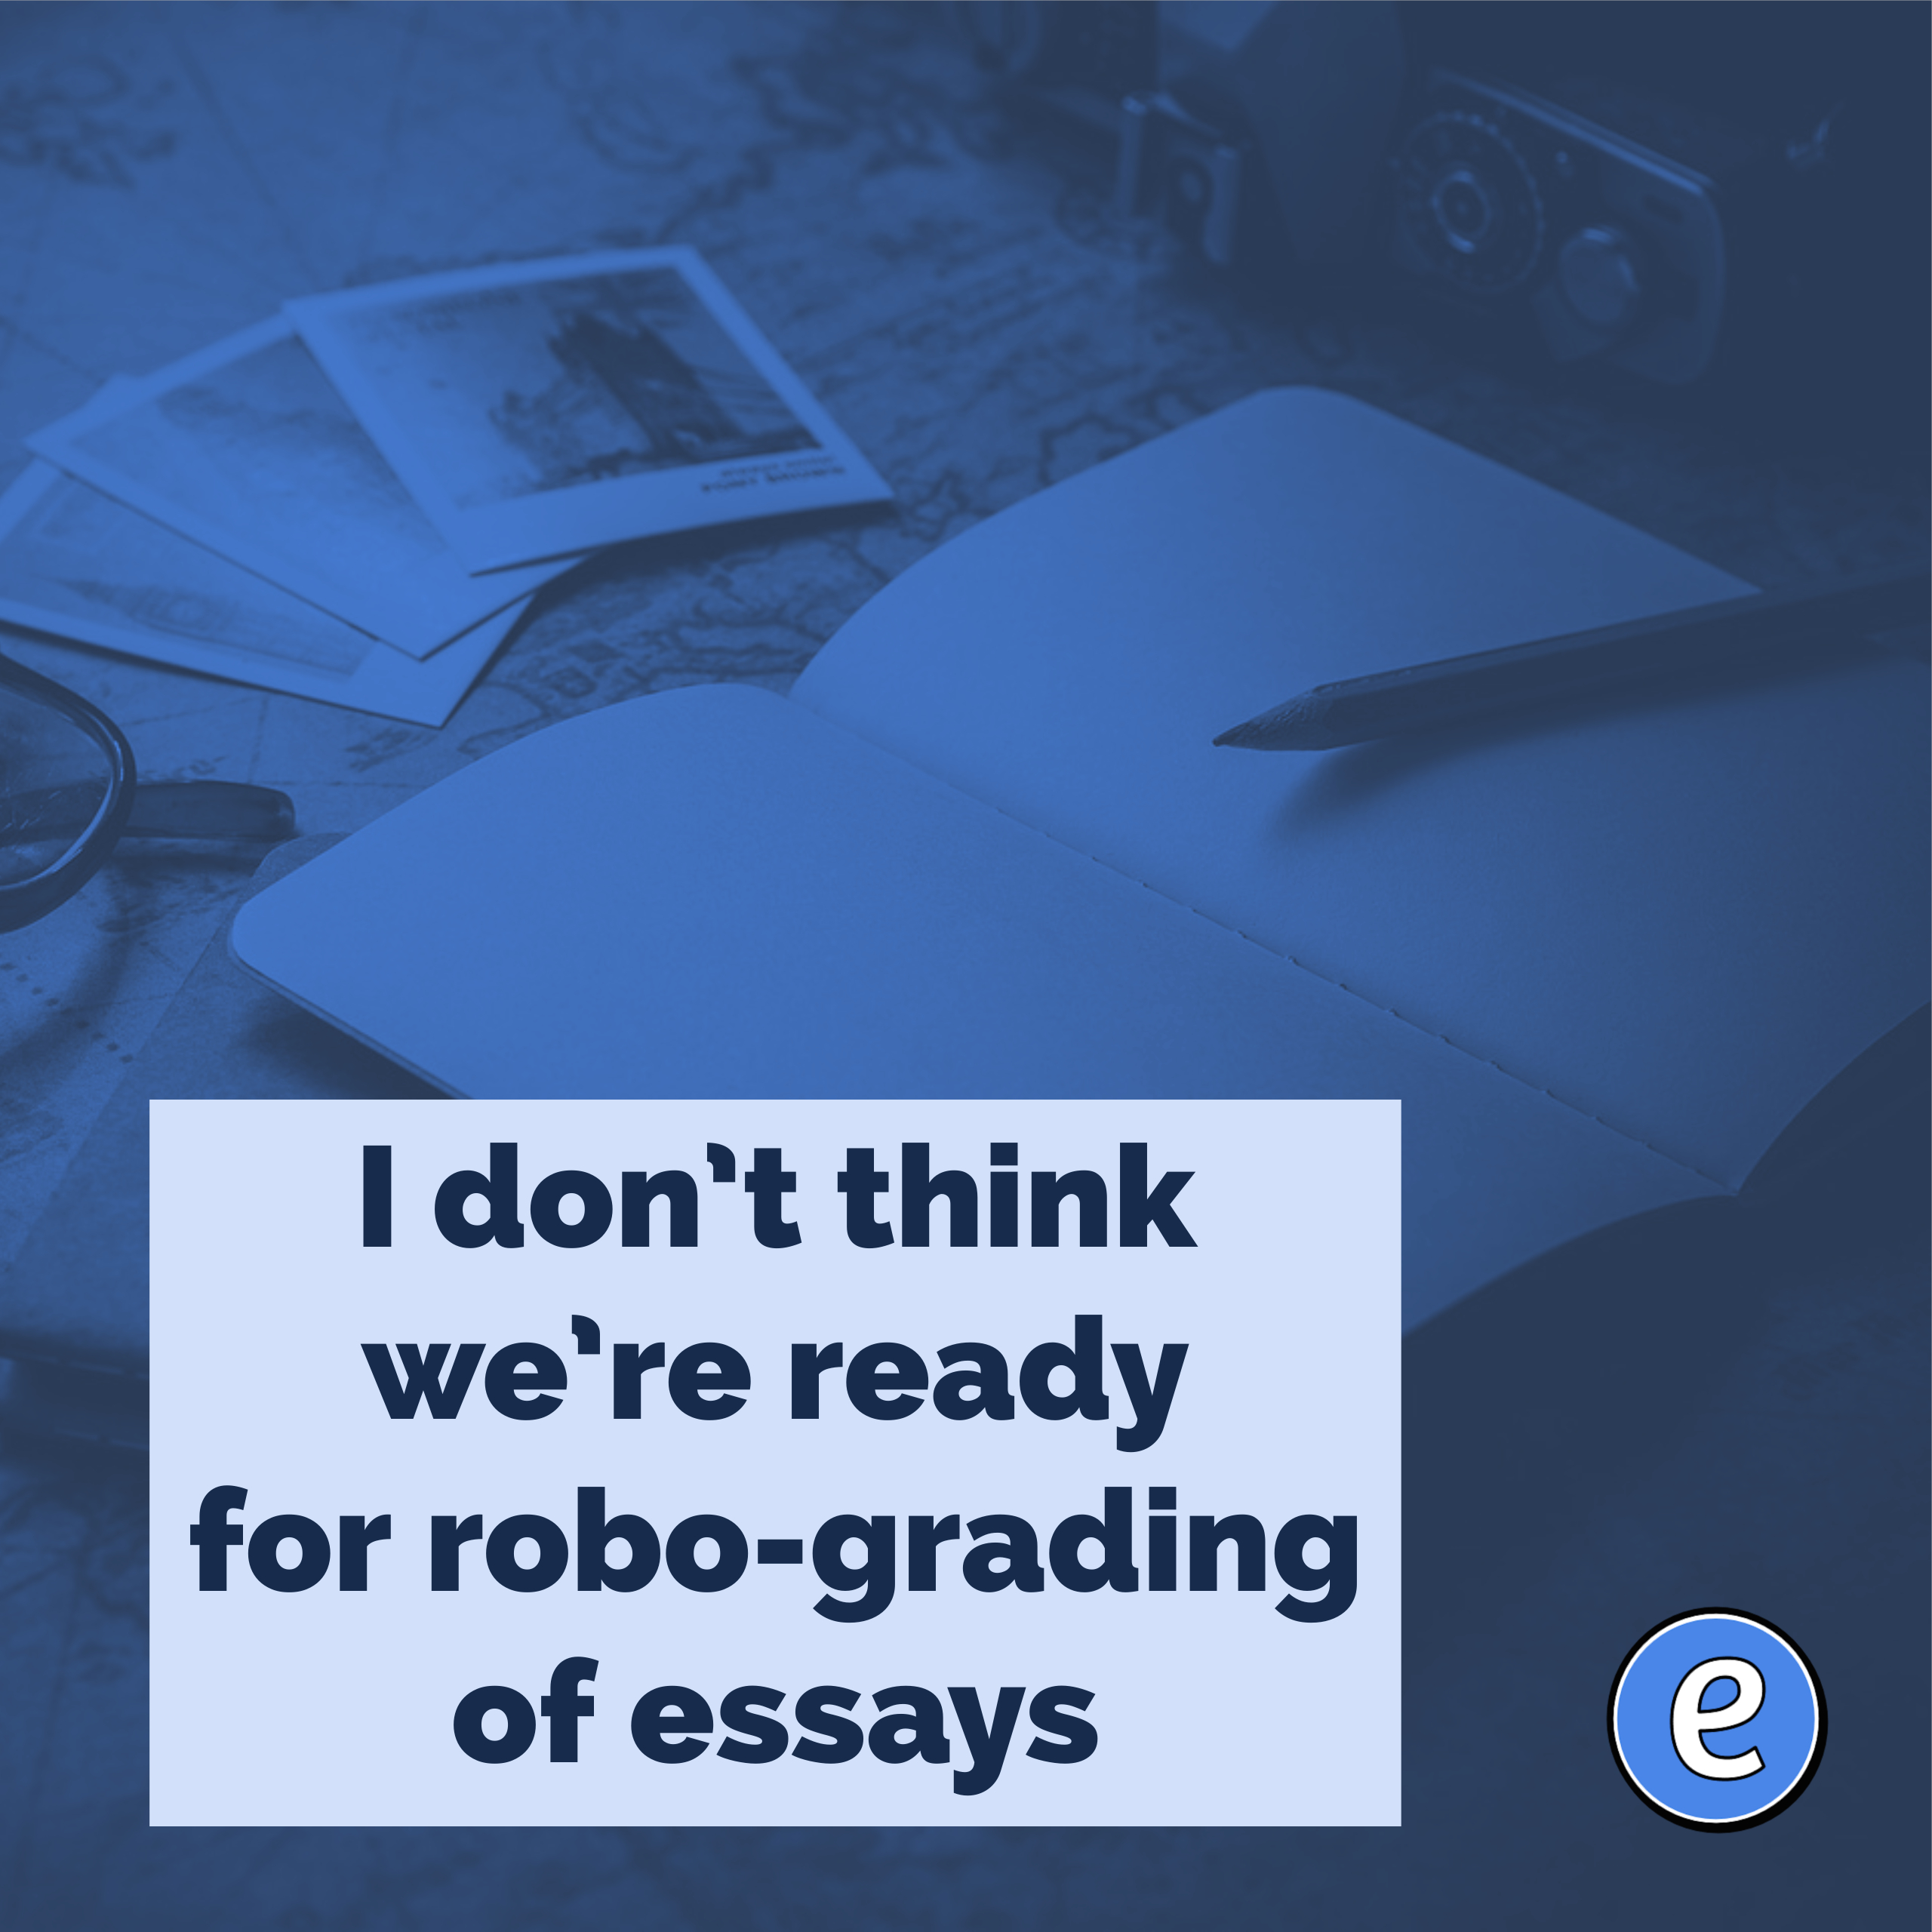 I don’t think we’re ready for robo-grading of essays